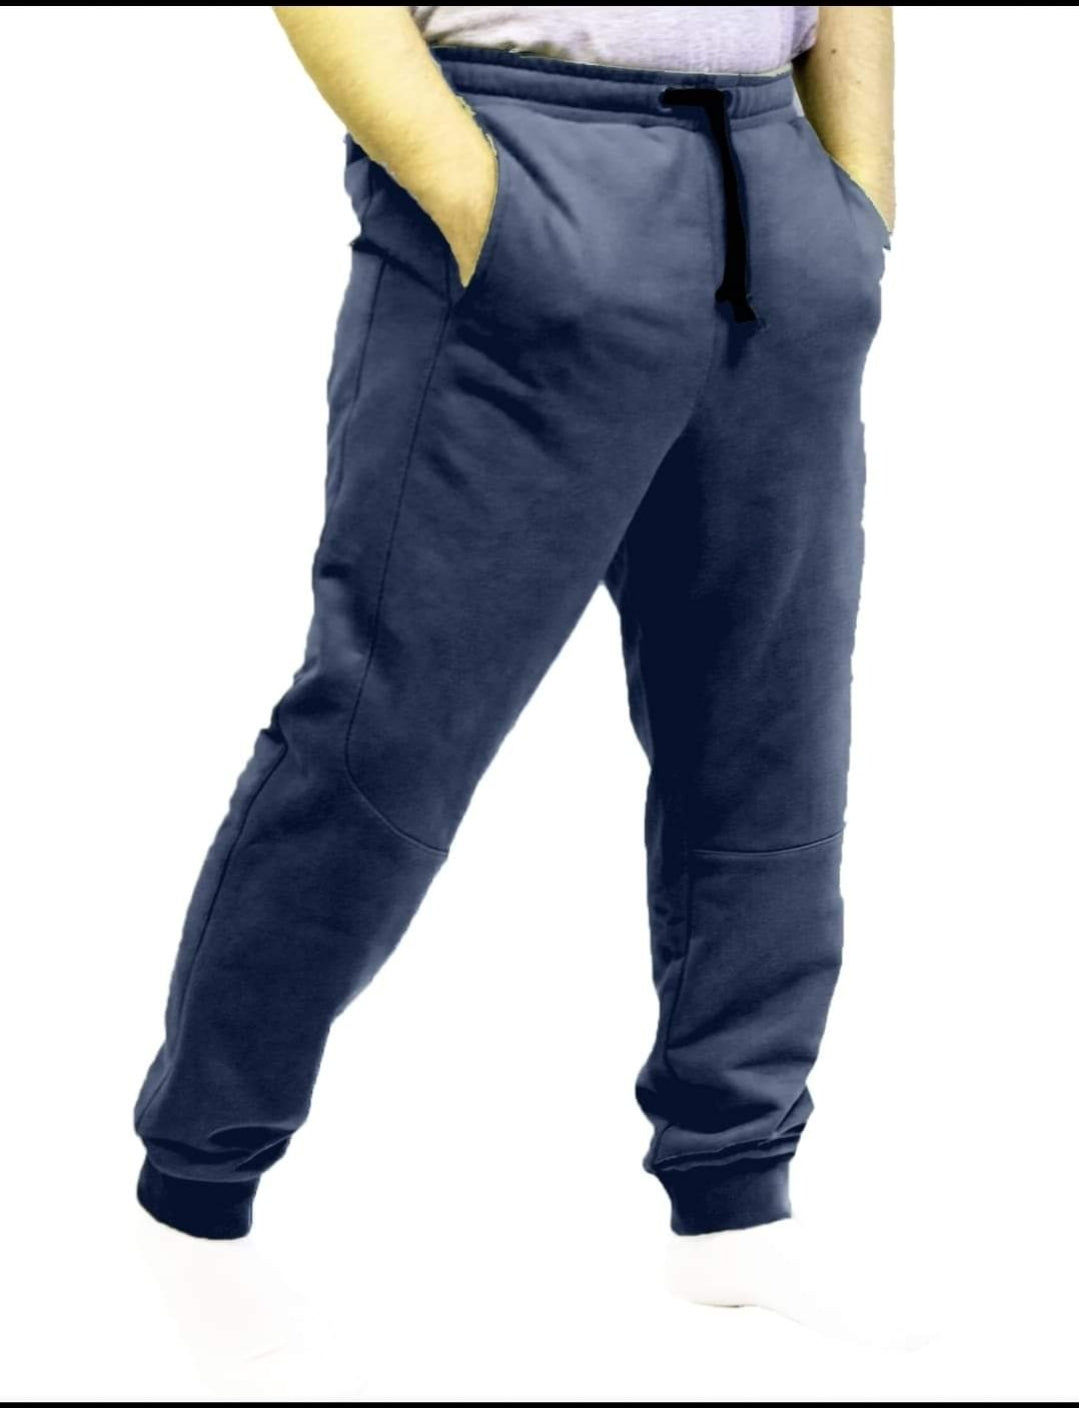 Solid Navy Joggers and Lounge Pants